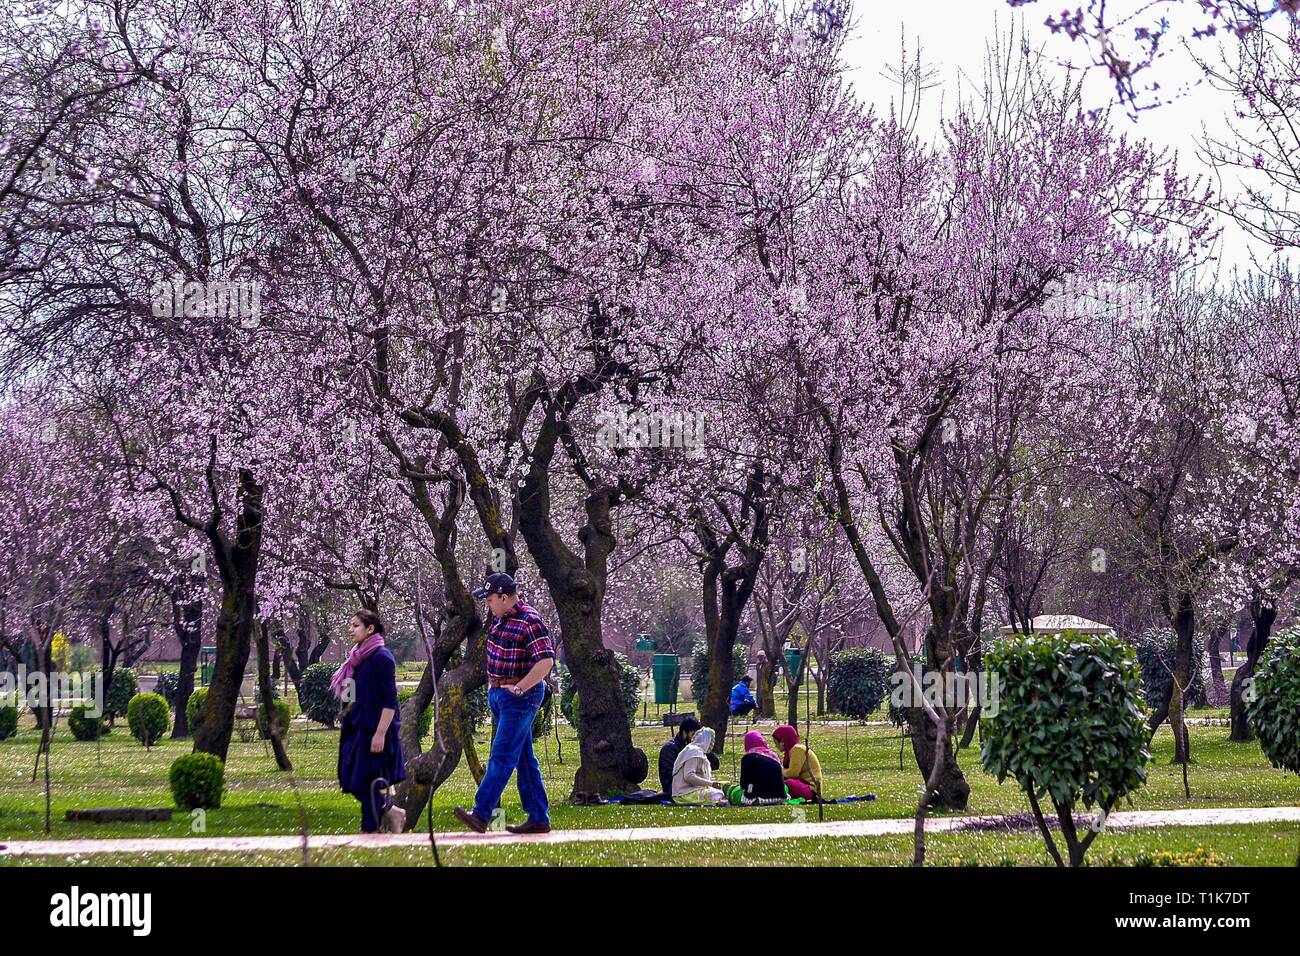 March 27, 2019 - Srinagar, J&K, India - Visitors are seen walking at the Badam Vaer ( Almond garden) on a sunny spring day in Srinagar, Kashmir. Spring has arrived in Kashmir valley, which marks a thawing of the lean season for tourism in the Himalayan region. Credit: Saqib Majeed/SOPA Images/ZUMA Wire/Alamy Live News Stock Photo